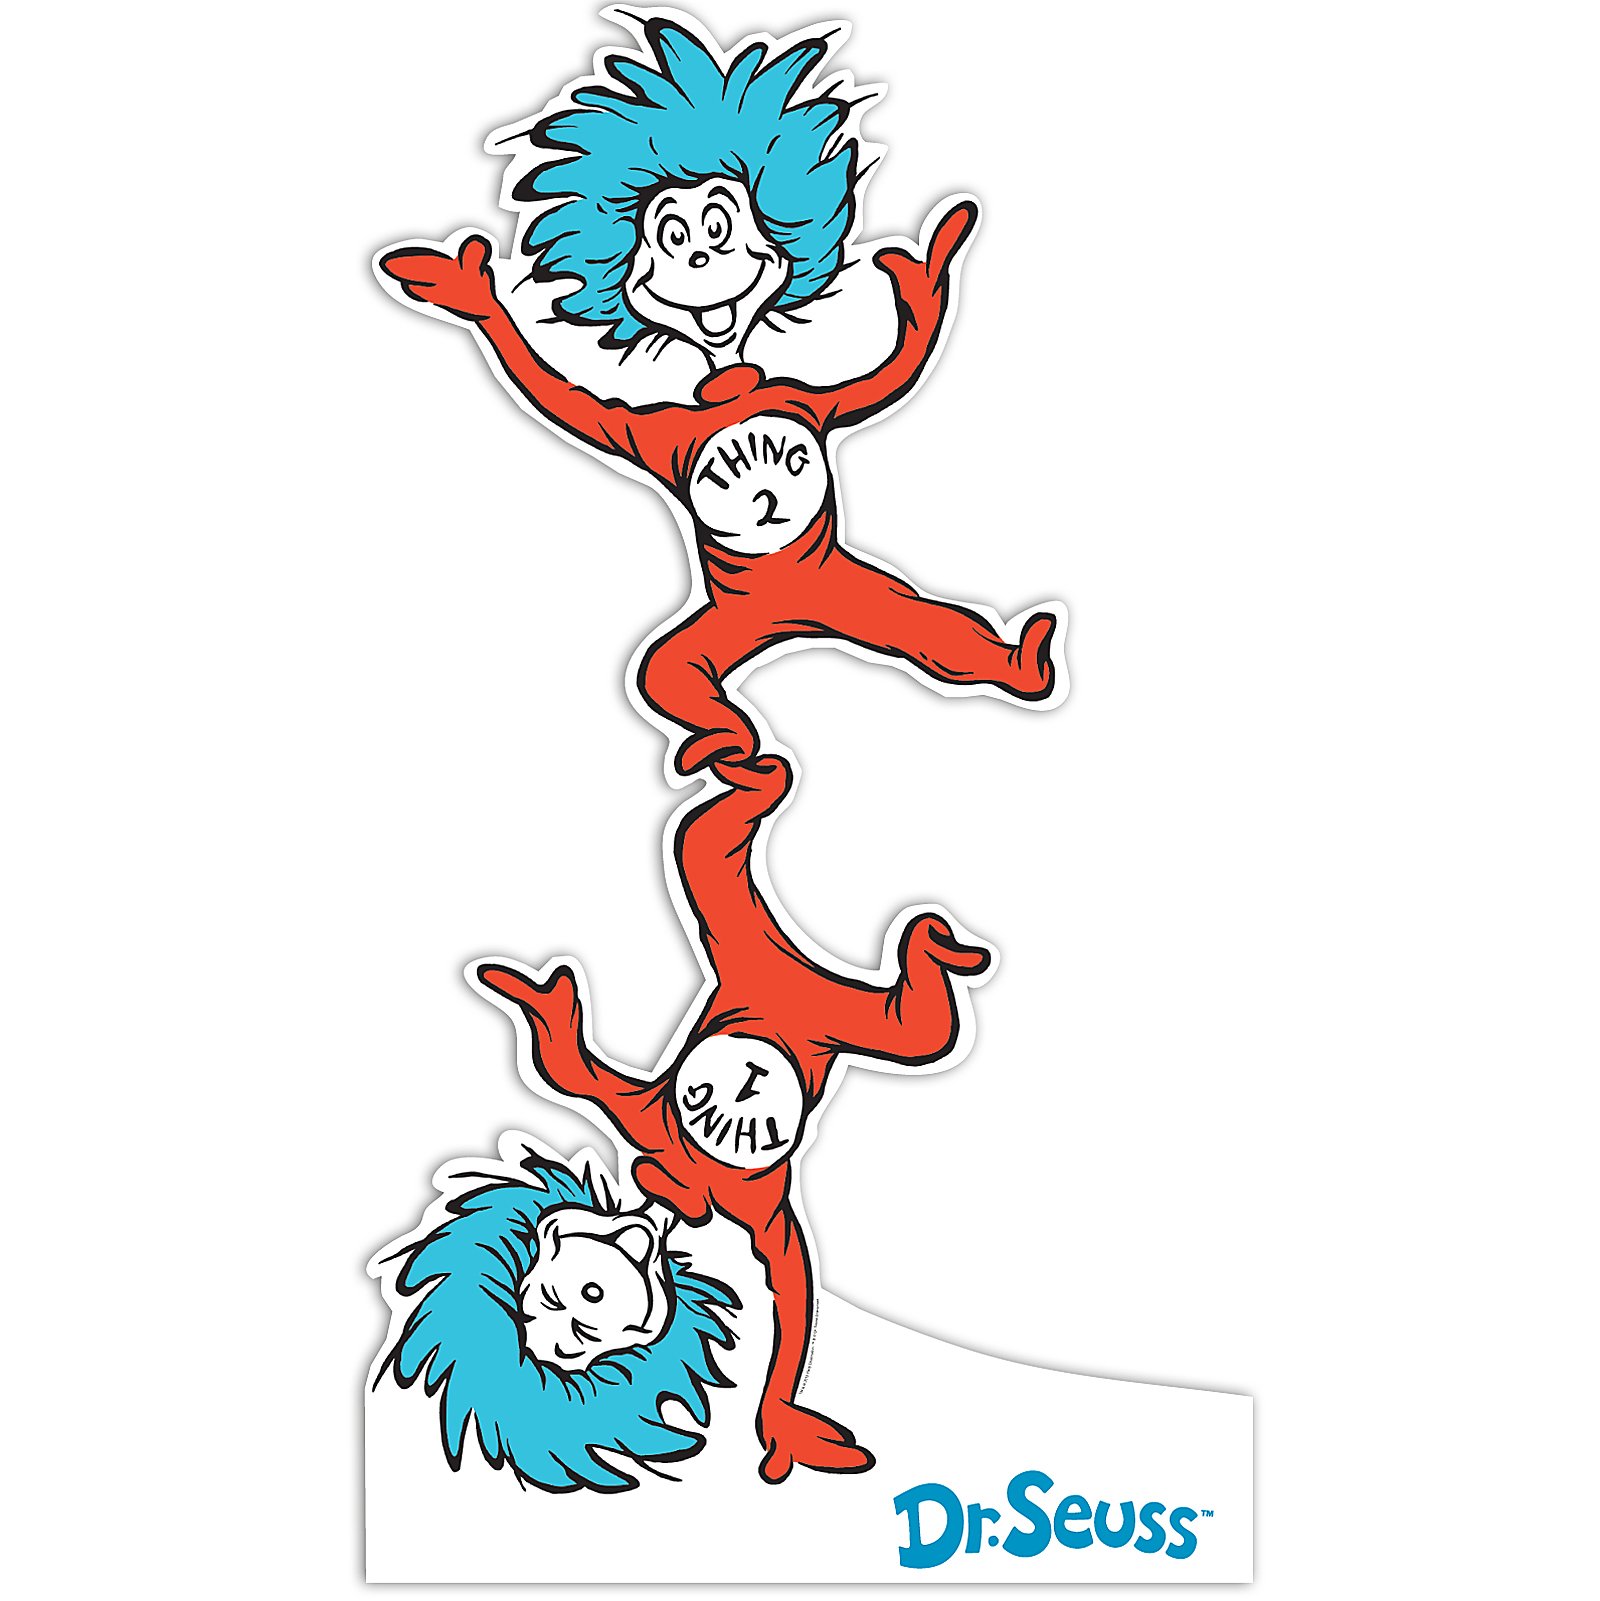 Cat In The Hat Clip Art; Dr. Seuss; Cat In The Hat Thing 1 And Thing 2 ...